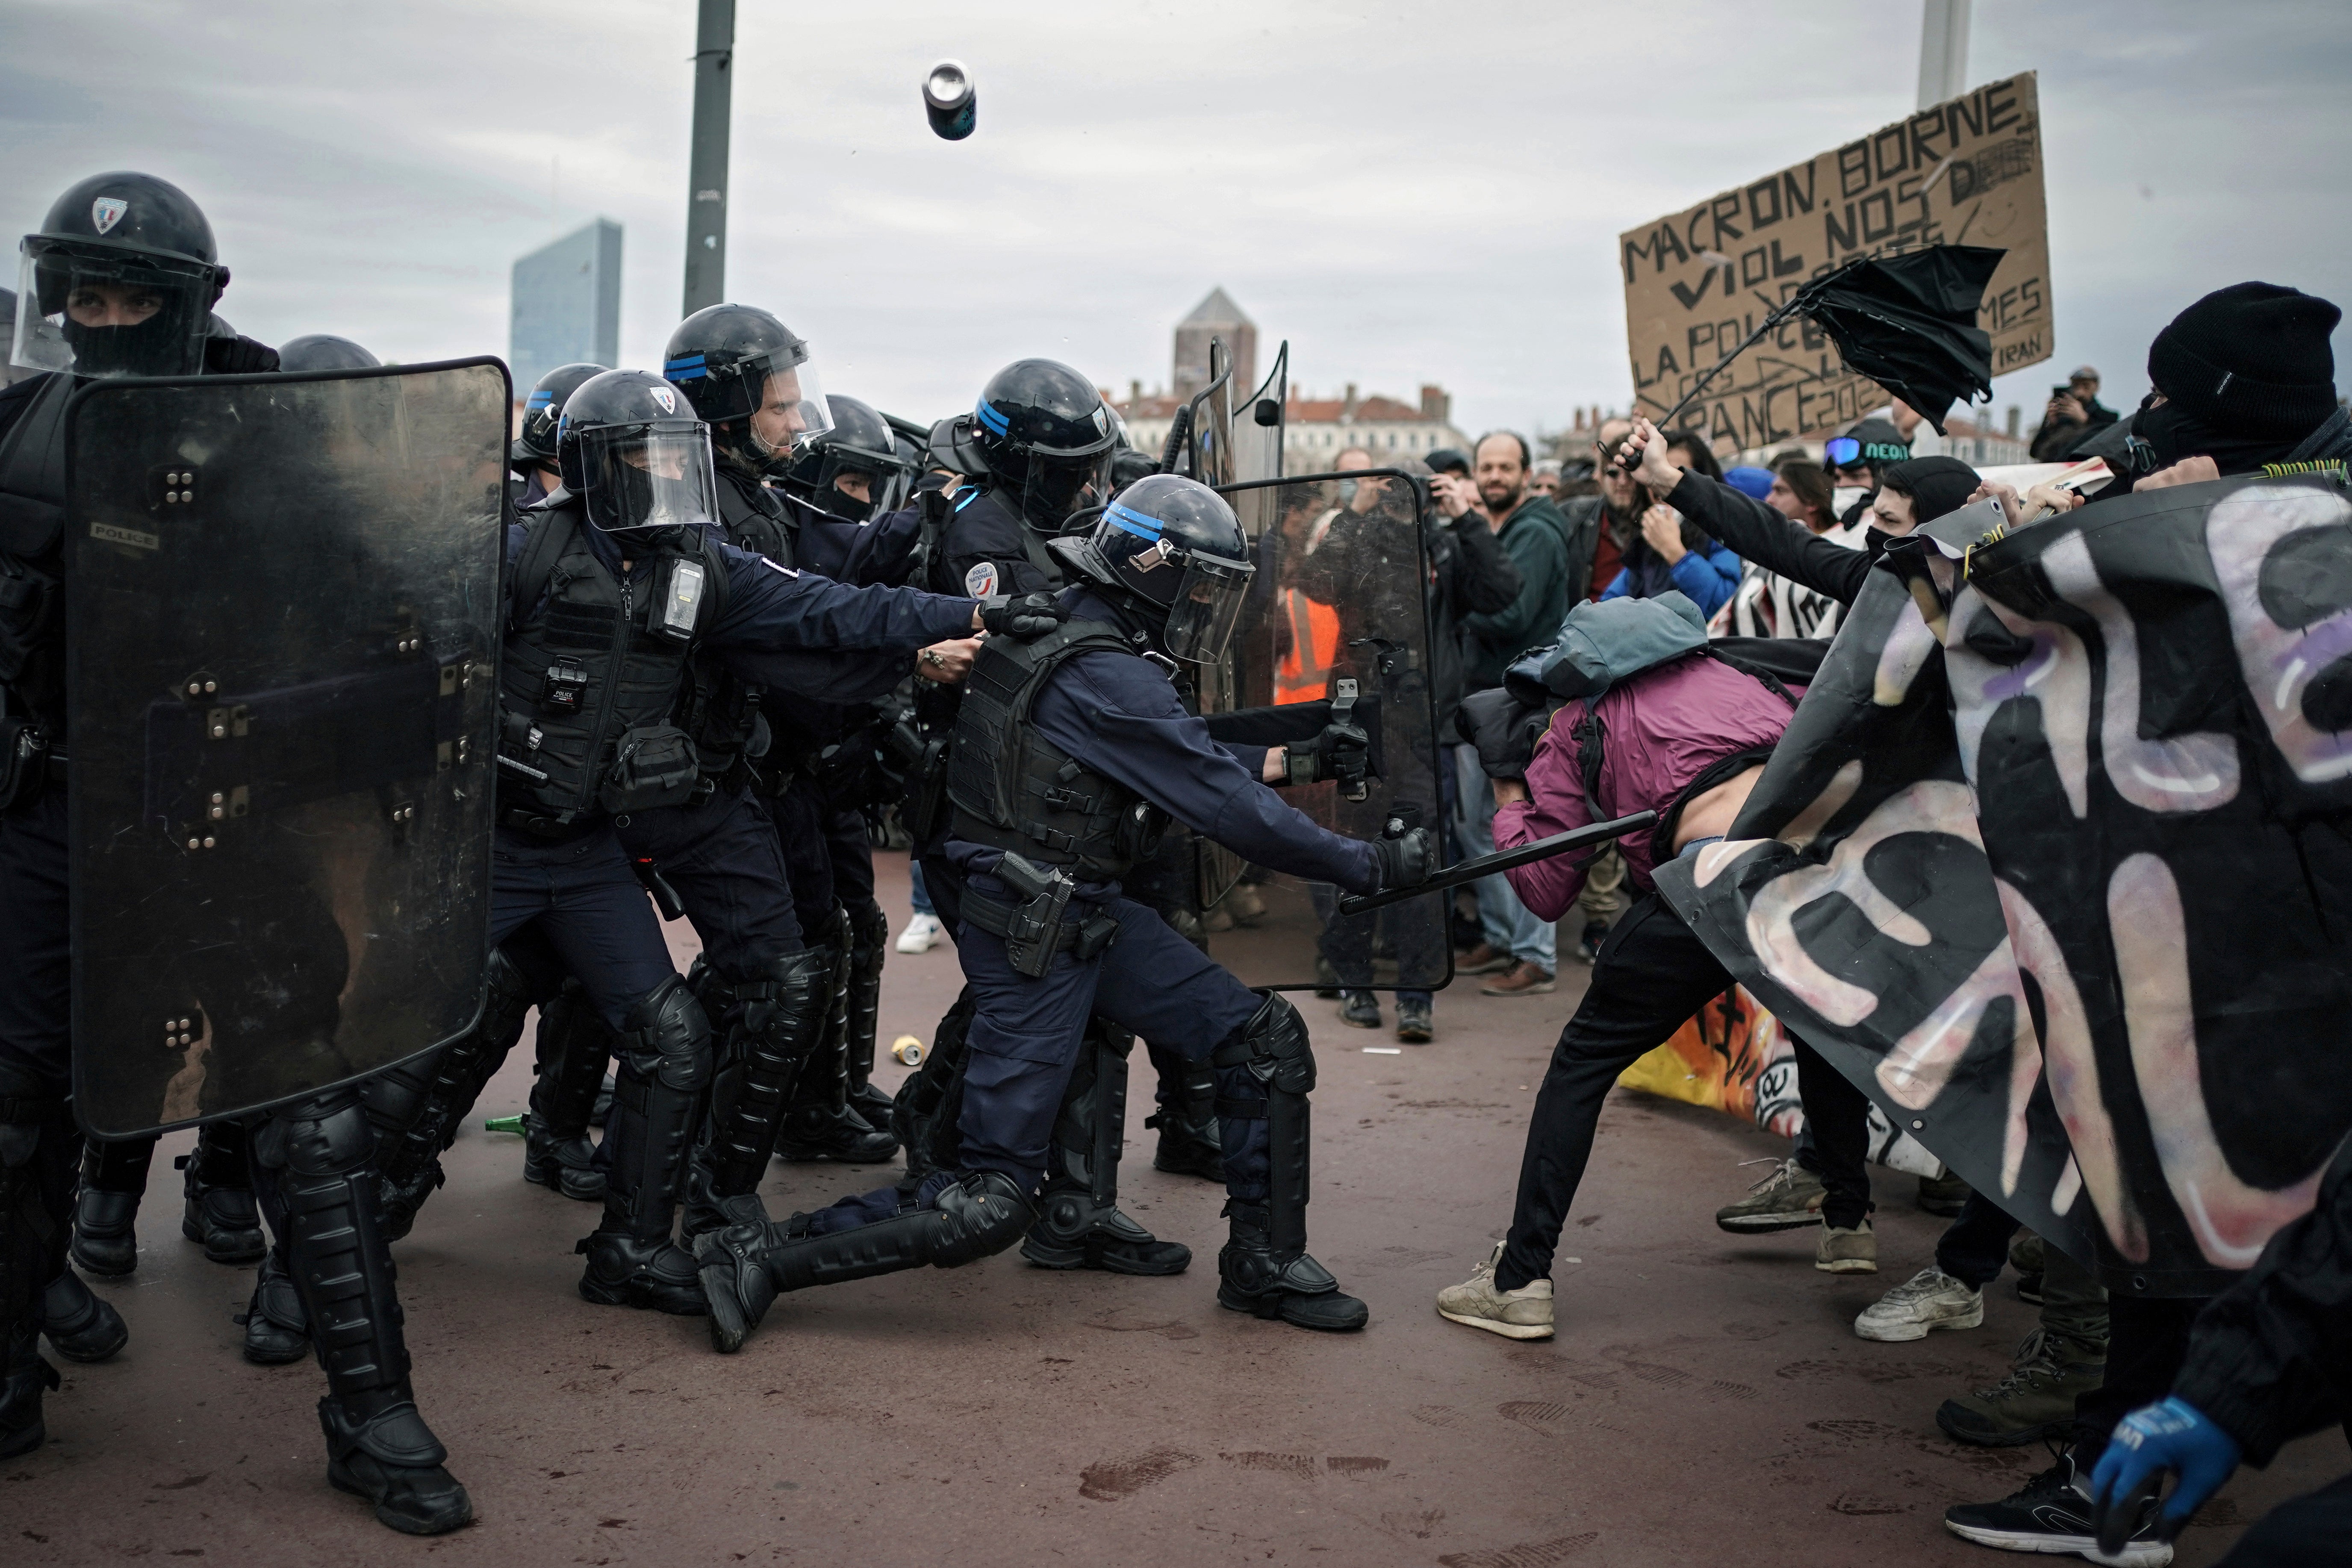 Protesters clash with police officers during a demonstration in Lyon, central France